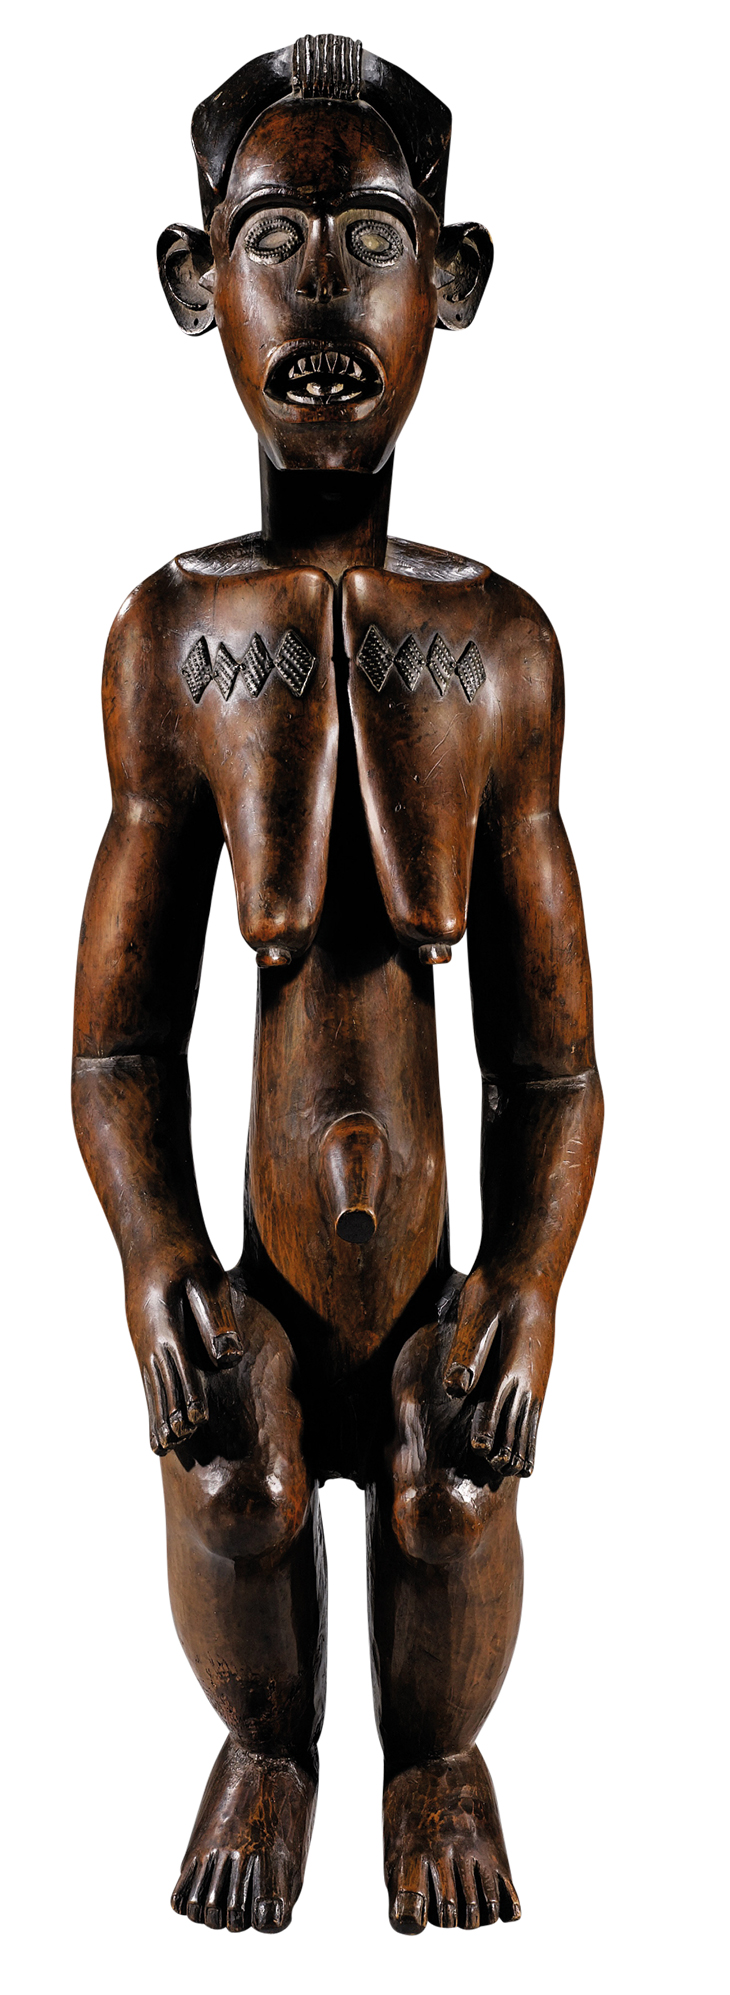 Statue of a woman (19th century), Fang Mabea, Cameroon.